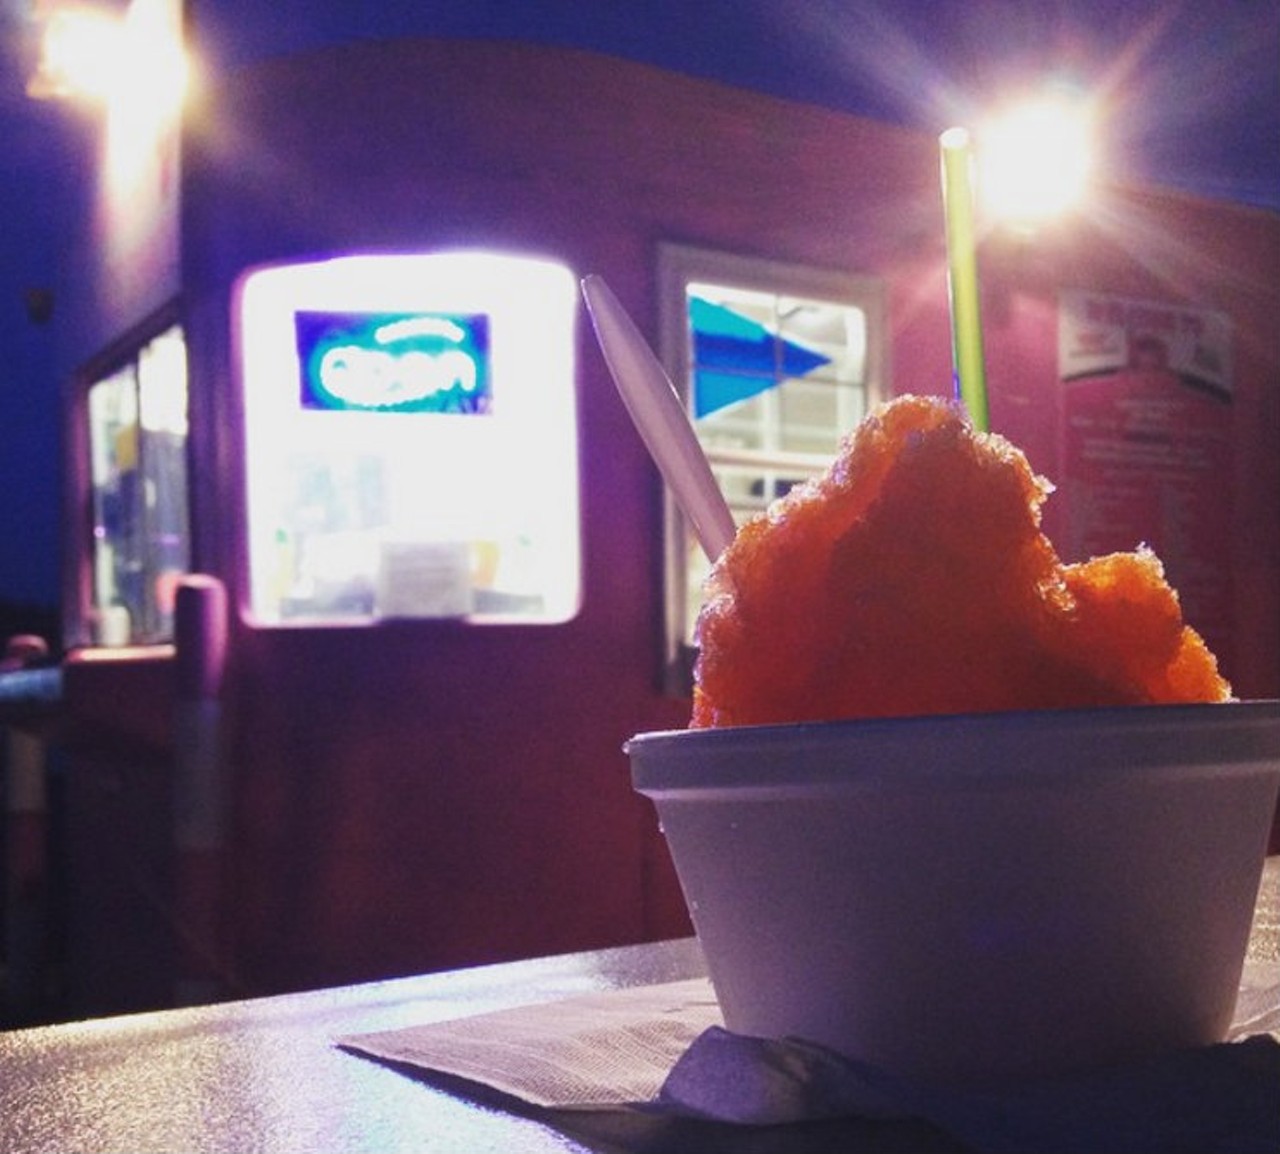 Pink&#146;s Hawaiian Shaved Ice has more than 50 flavors to choose from, and you can mix and match as many flavors as you like to get your perfect snow cone. Pink&#146;s Hawaiian Shaved Ice is open from 12 p.m. to 9 p.m. on weekends and 2 p.m. to 9 p.m. on weekdays. Photo courtesy of Instagram / holycrap_itslaura.